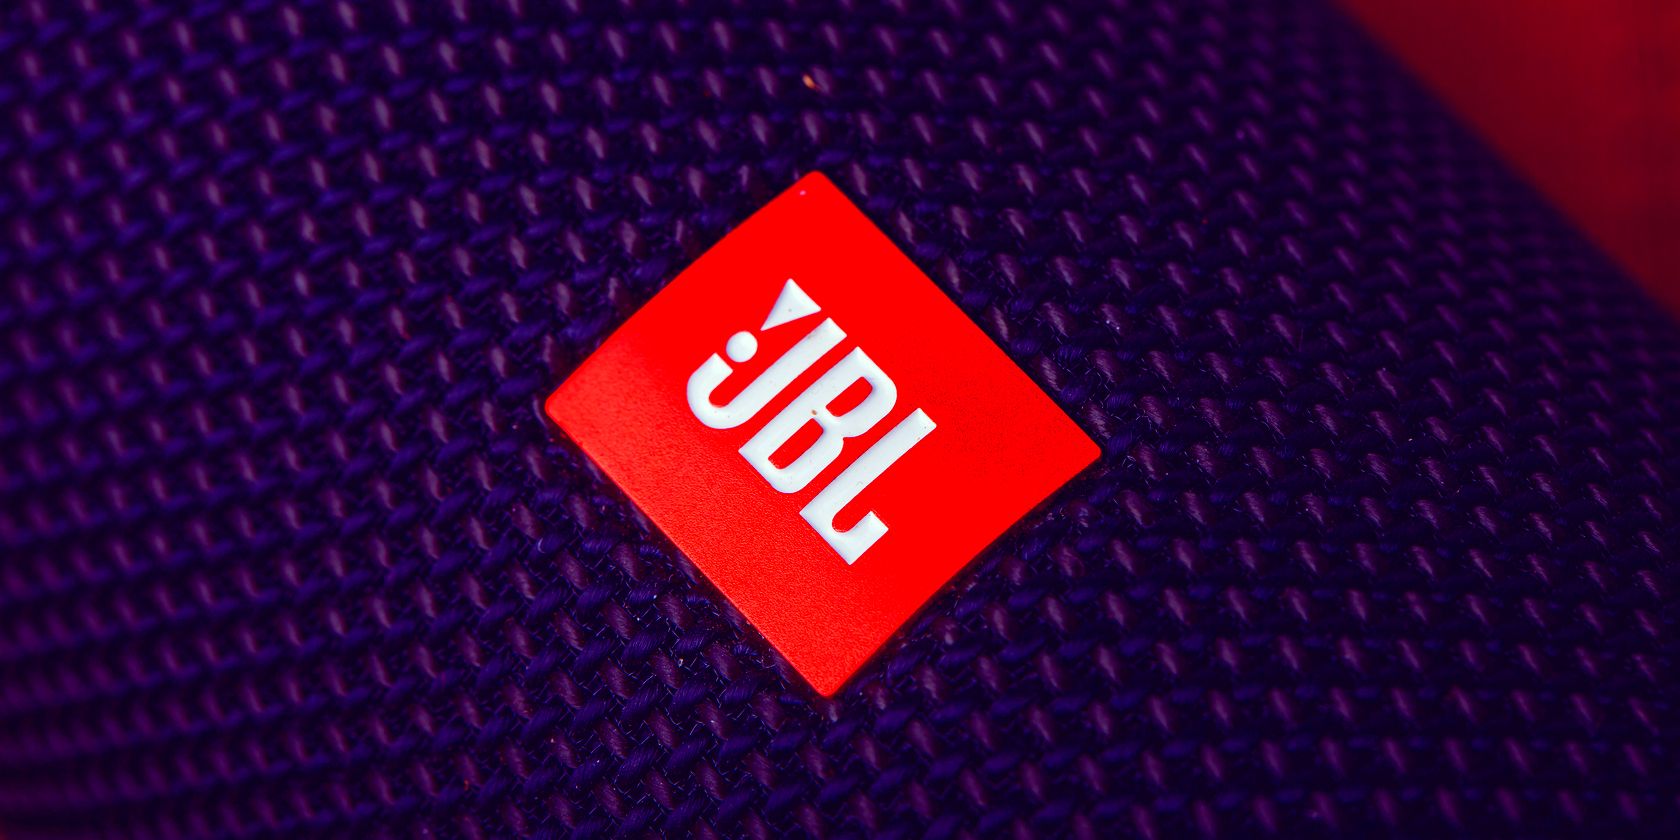 JBL feature